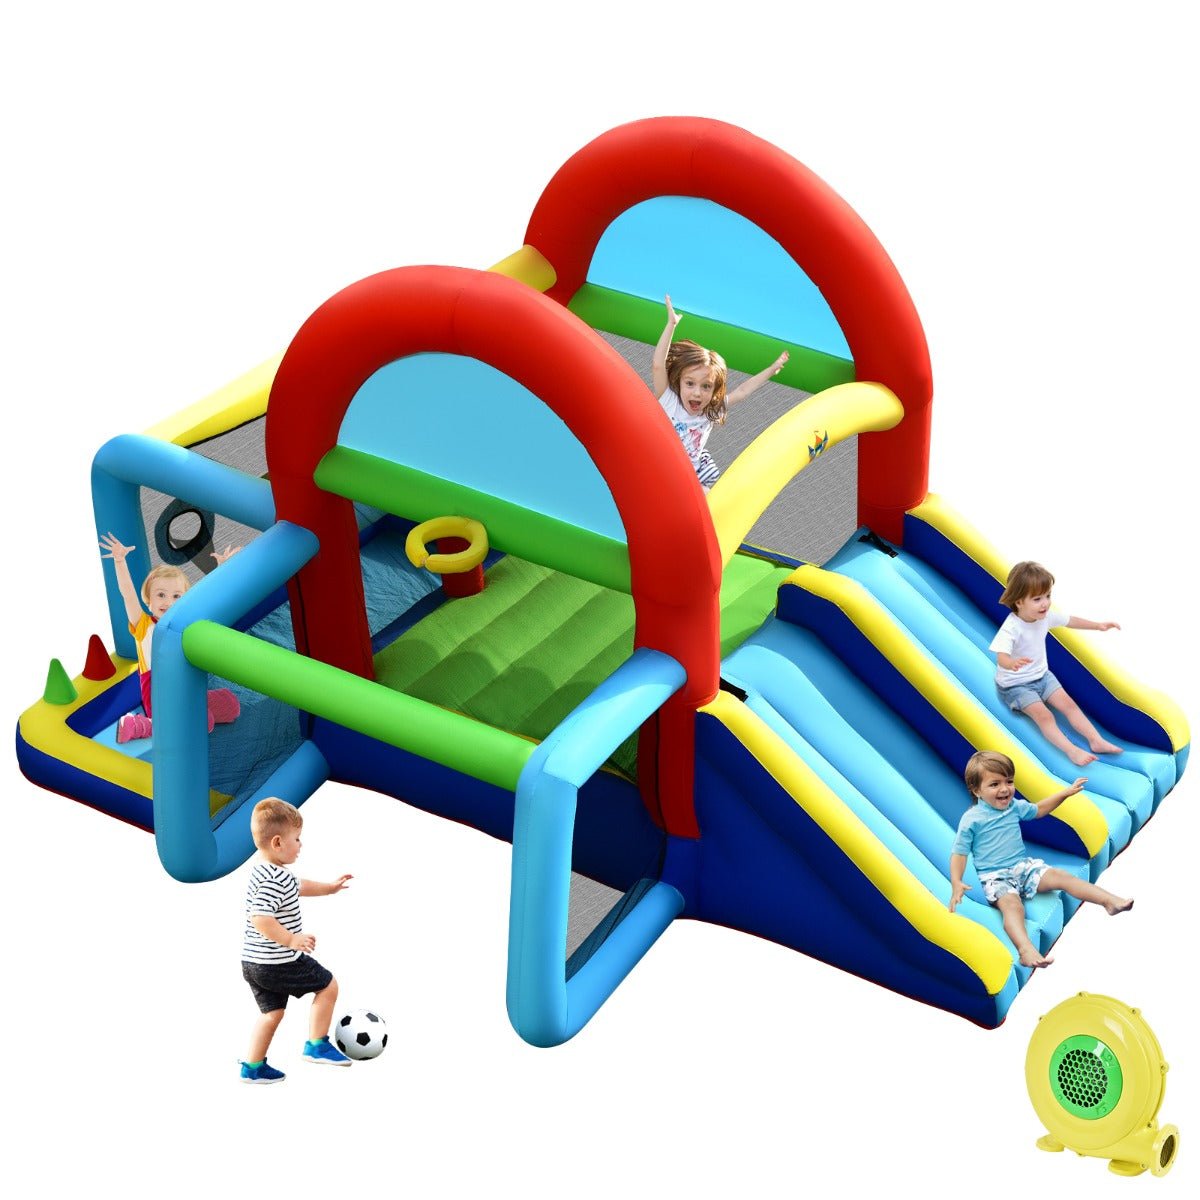 Inflatable Bounce House with Dual Slides & Jumping Area - Complete Set